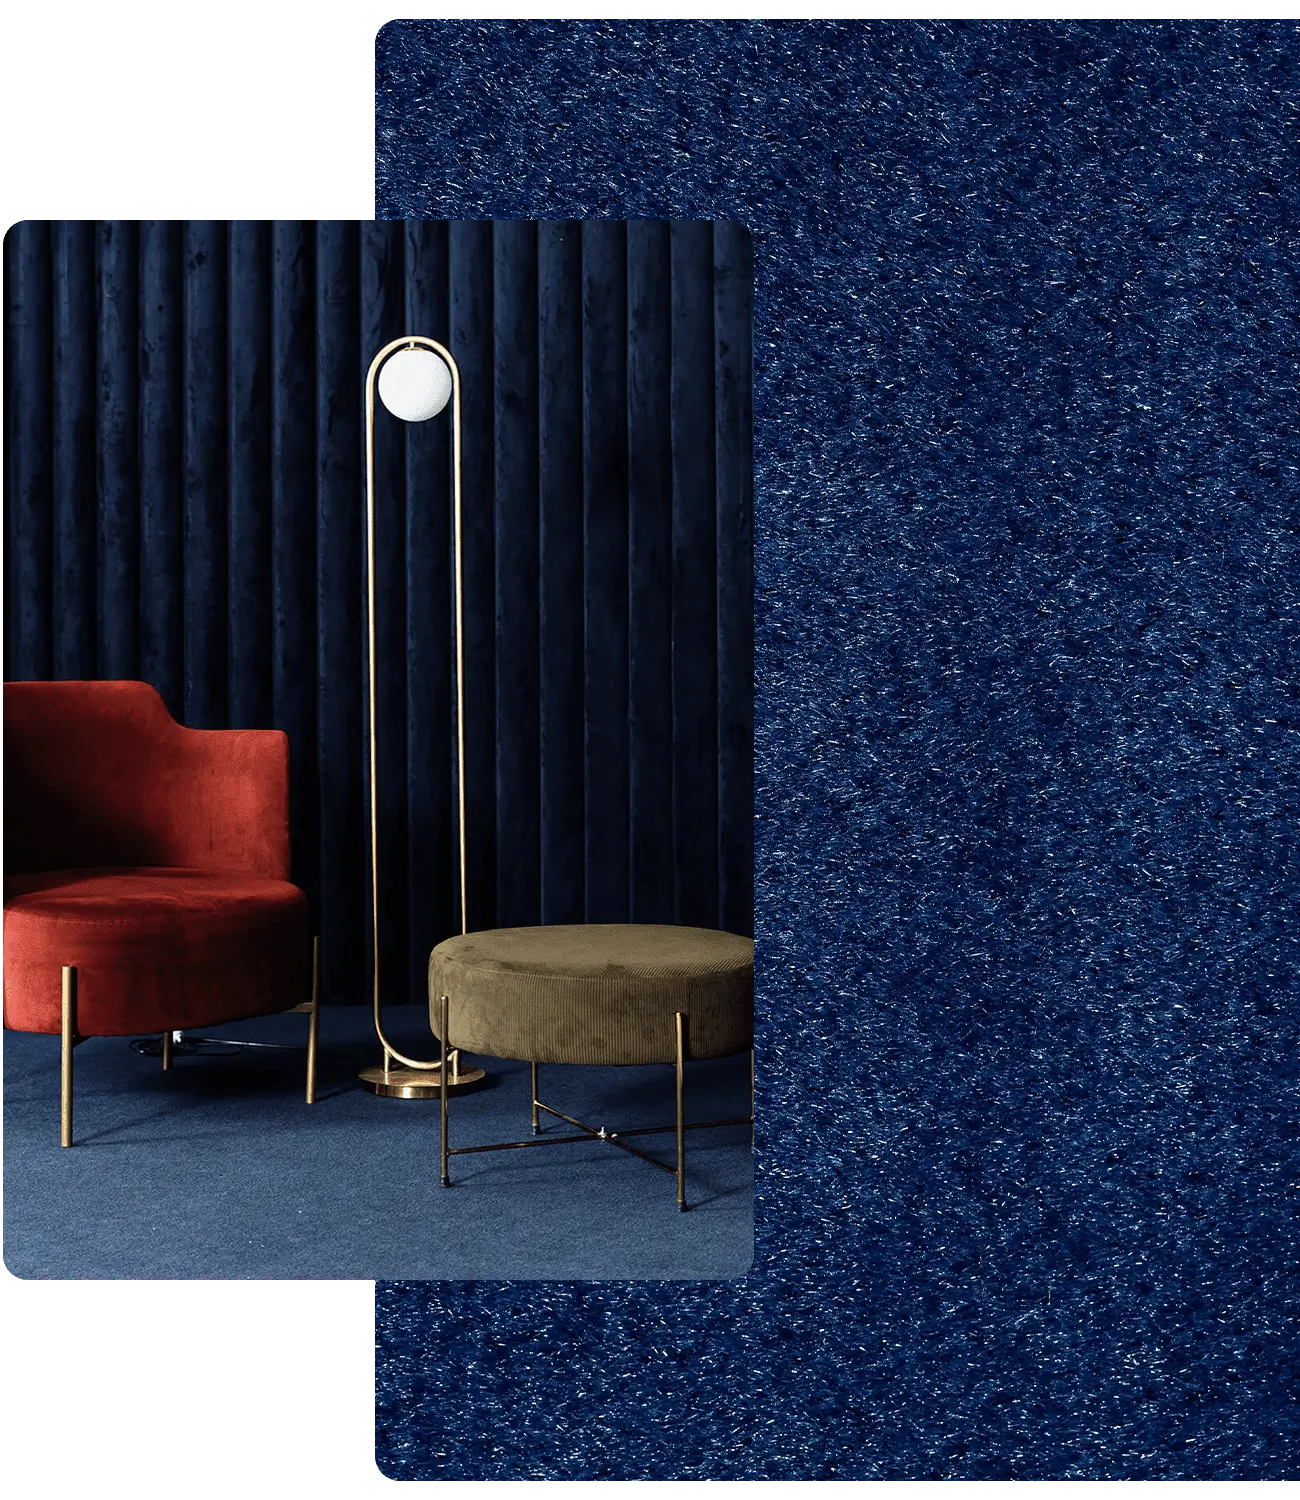 A red chair, olive-green ottoman, and tall floor lamp are arranged on a blue carpet in front of a dark curtain backdrop.